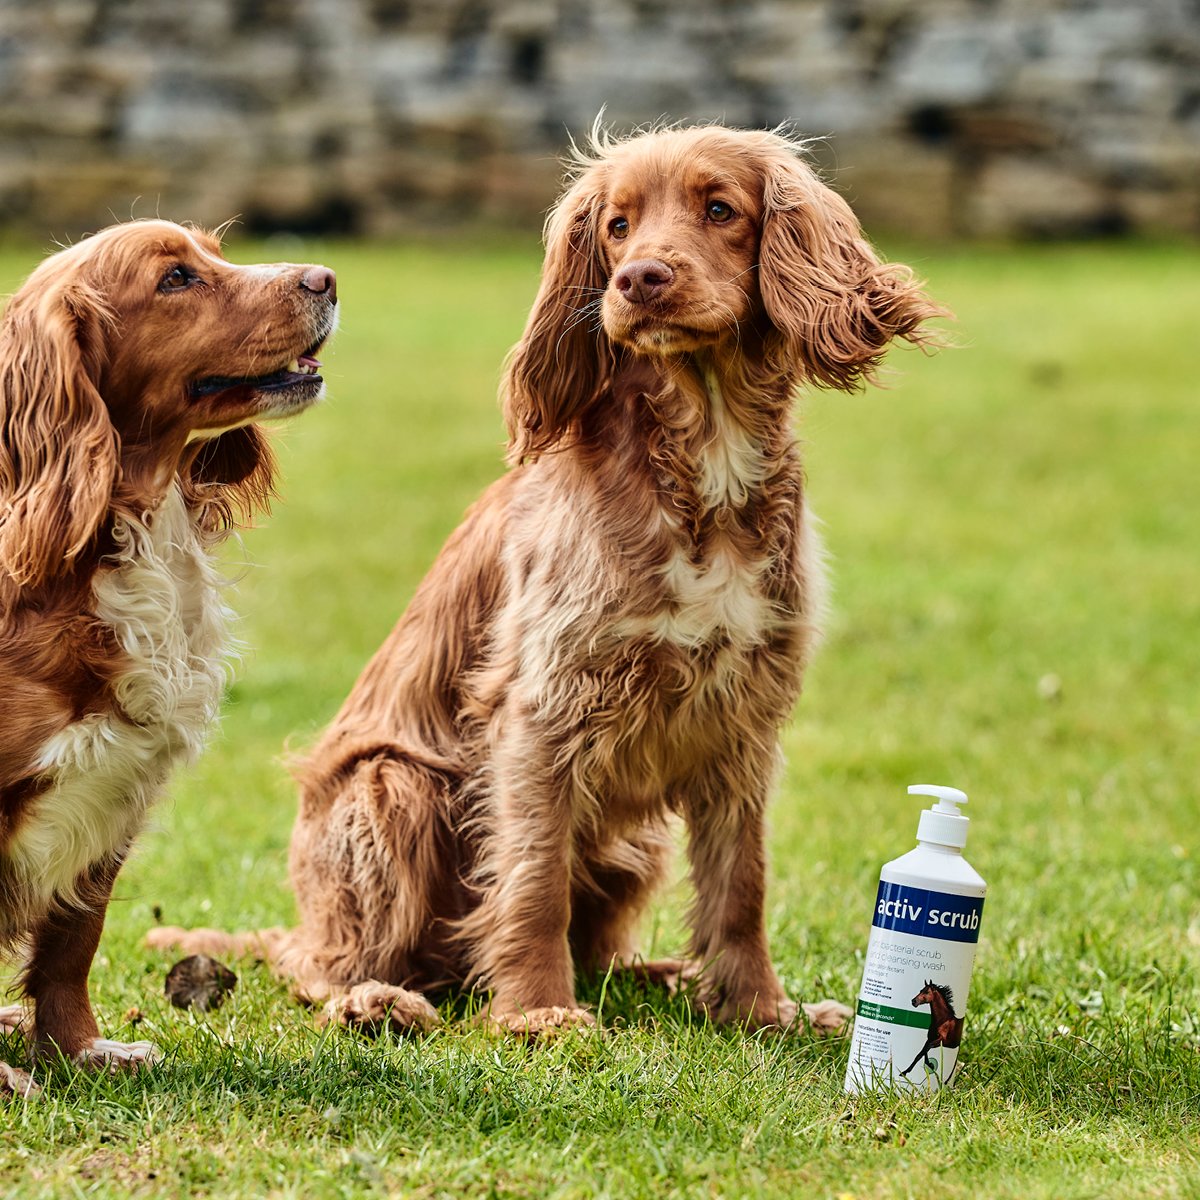 Two dogs in a field with an activscrub infront of them